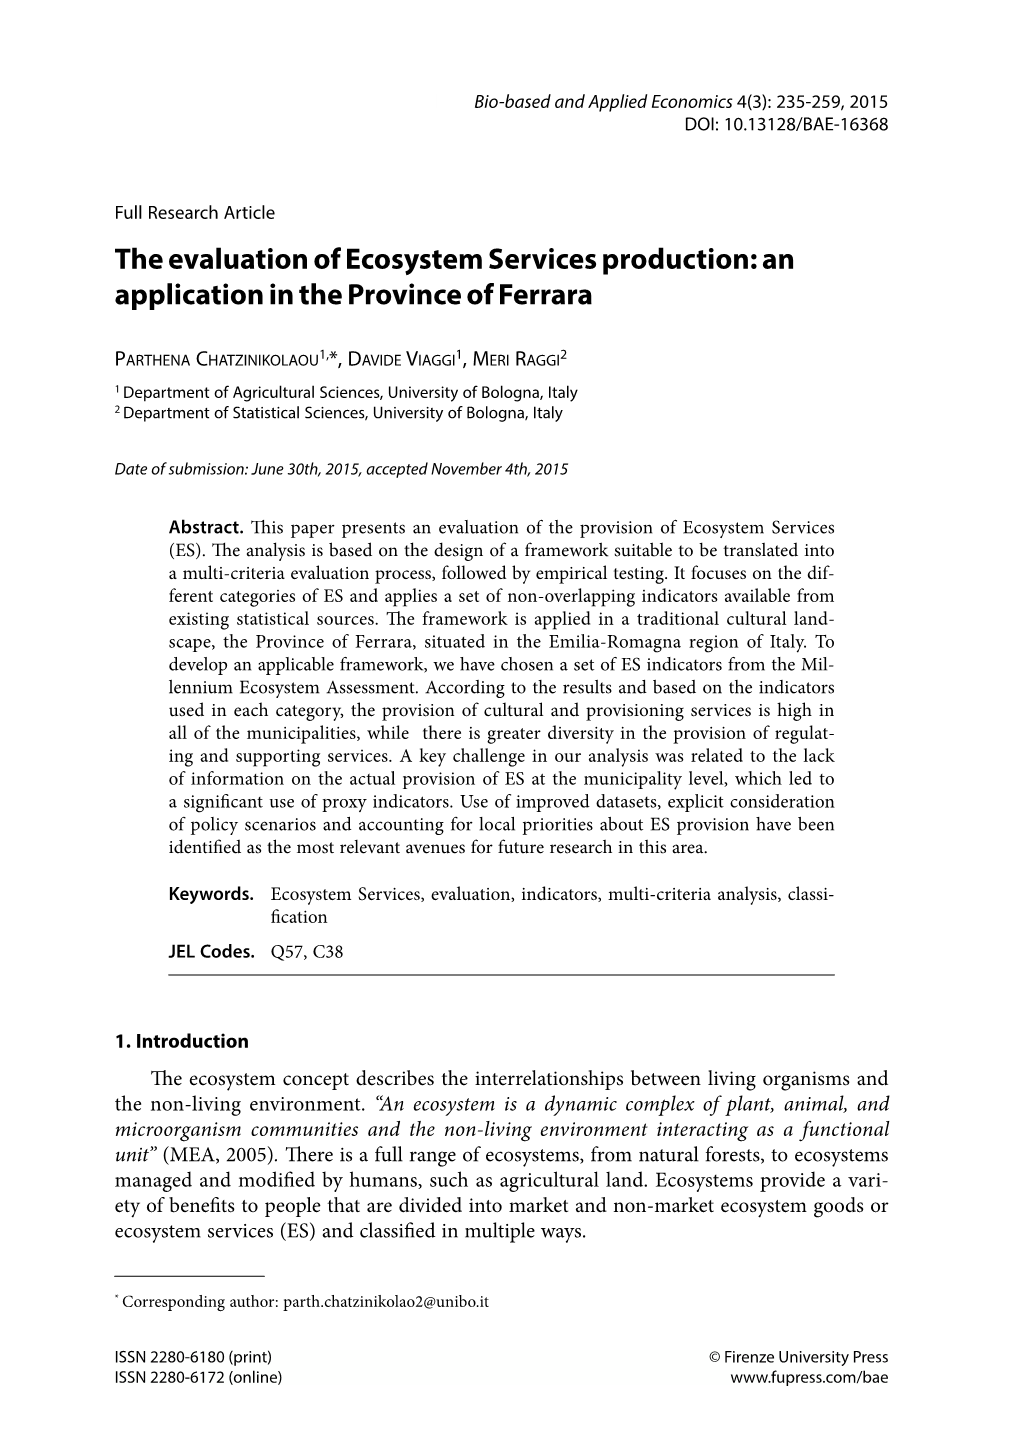 The Evaluation of Ecosystem Services Production: an Application in the Province of Ferrara